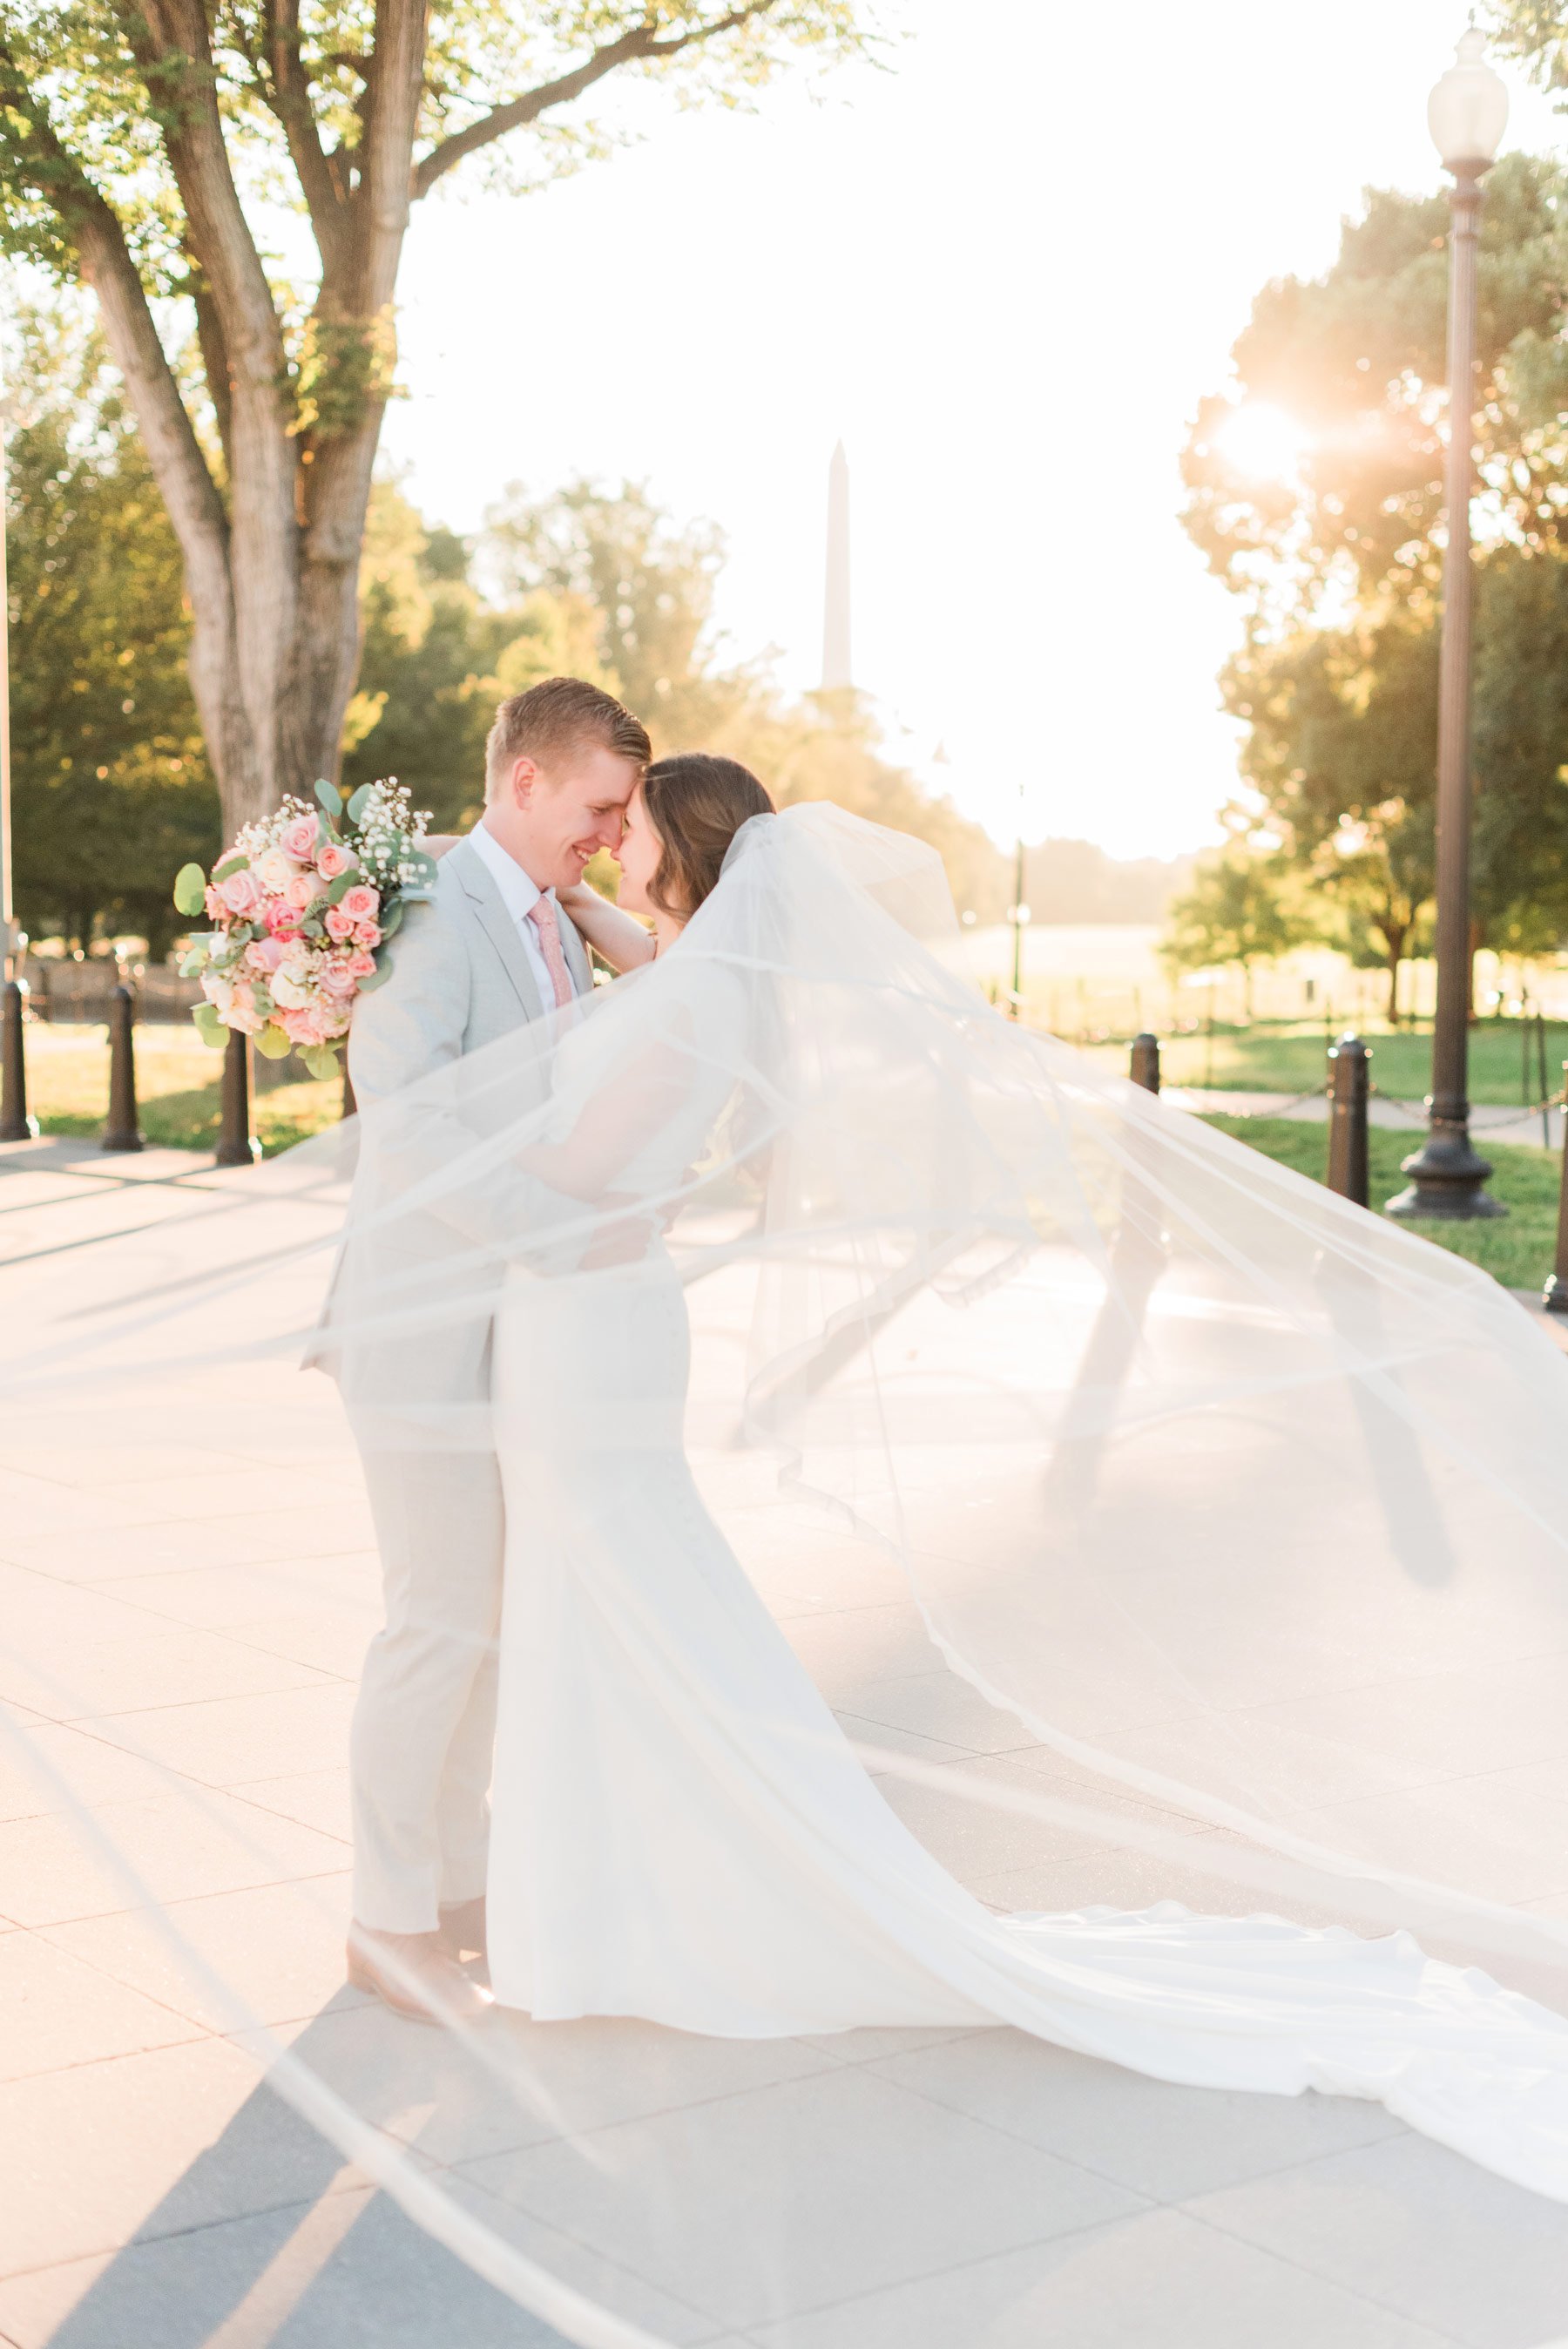    The modest bride’s veil is featured in this beautiful Washington DC wedding photo. #washingtondcphotography #washingtondctemple #washingtondcwedding #dcweddingphotographer #washingtondctemplewedding #eastcoastweddingphotographer #sunsetbridals #mo